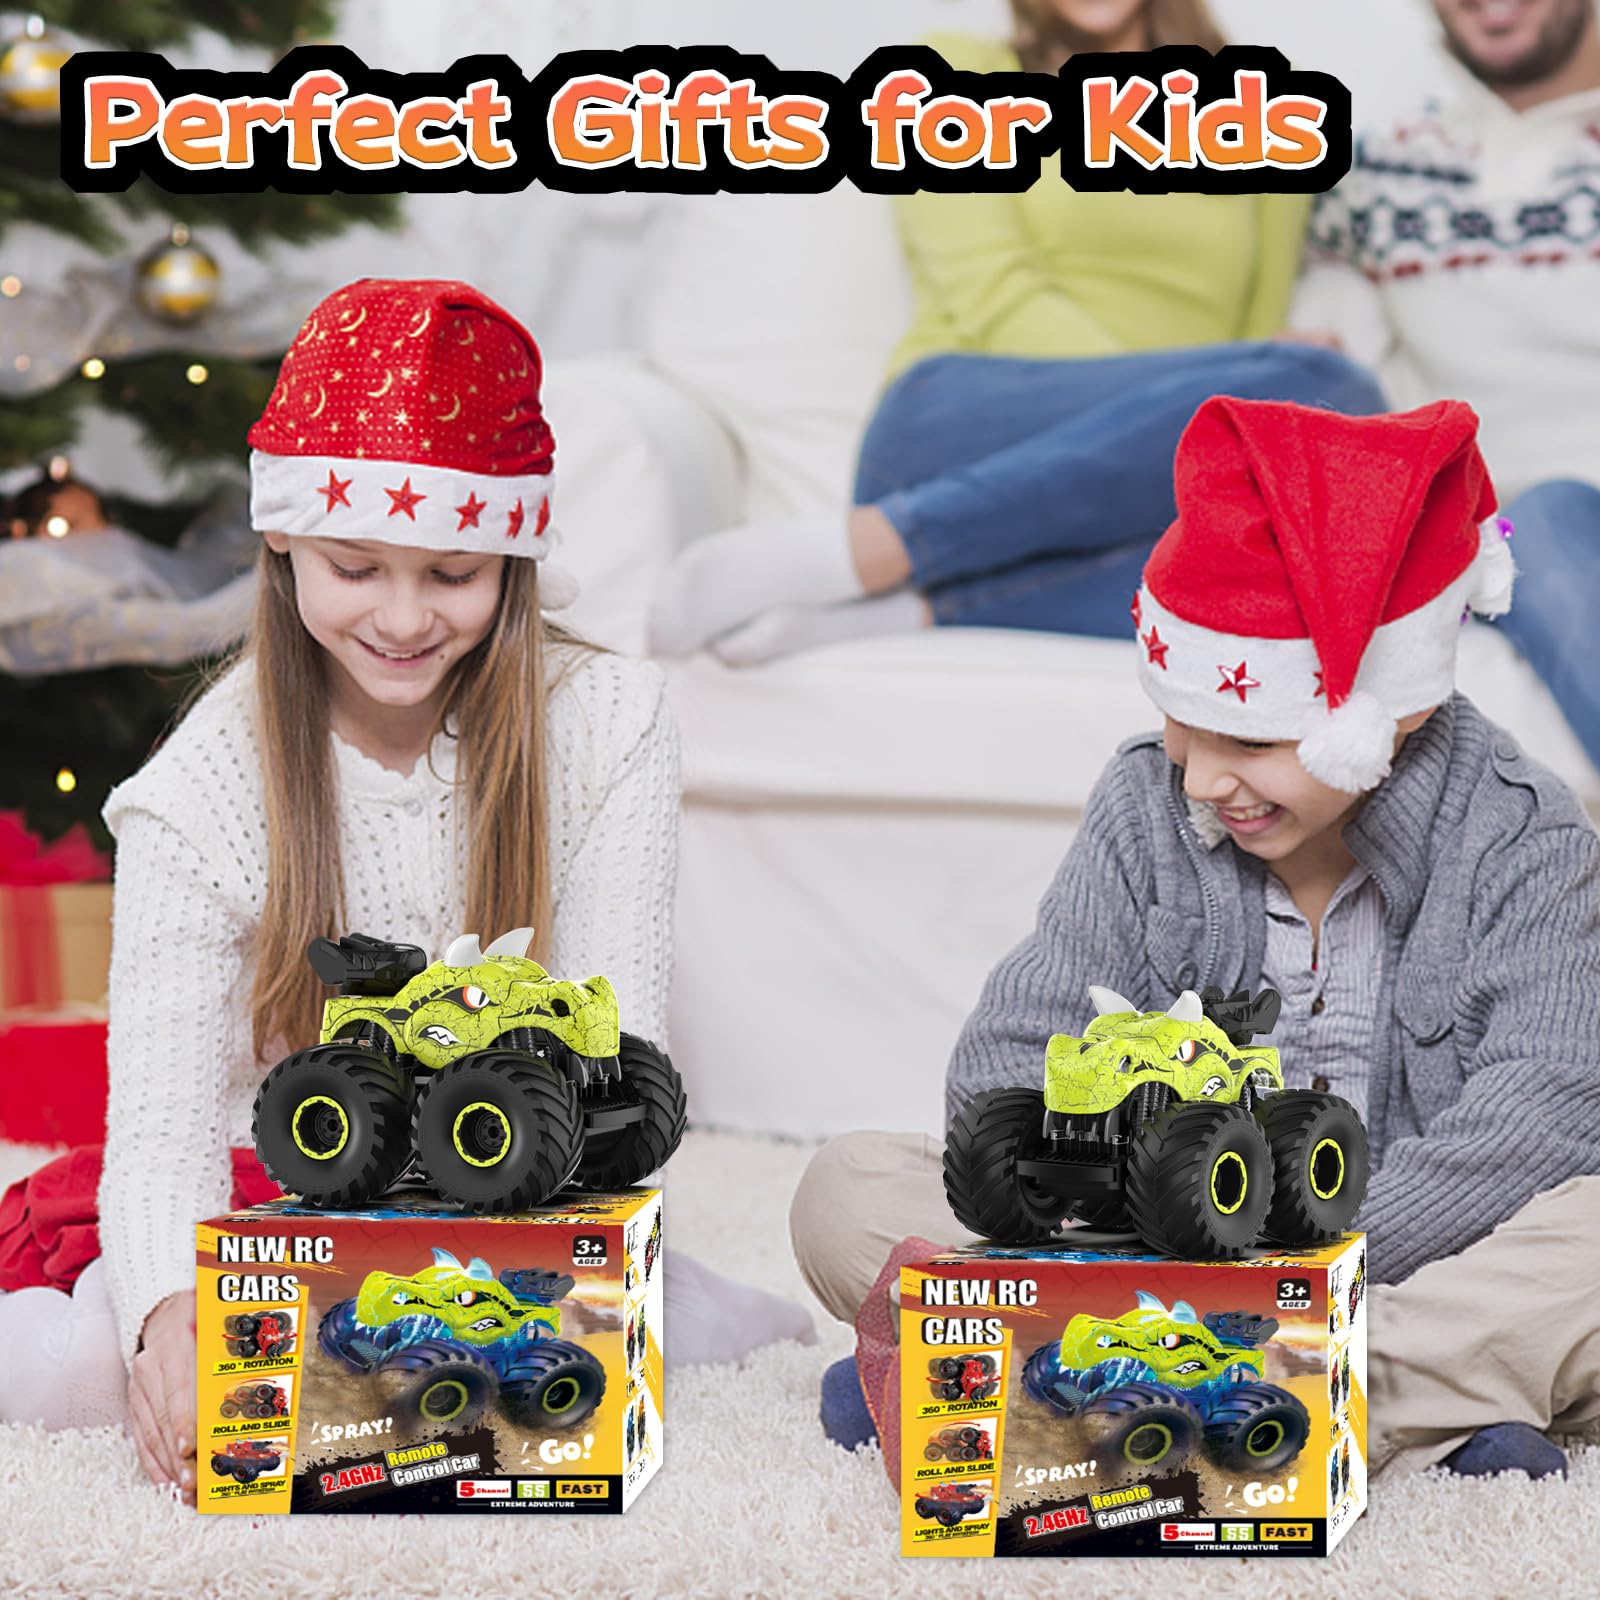 ScharkSpark Dinosaur Remote Control Car, 2.4GHz Monster Trucks for Boys Girls with Light, Sound & Spray, Dinosaur Toys Gift for Kids 3 4 5 6 7 8, All Terrain RC Cars for Toddlers with 2 Batteries